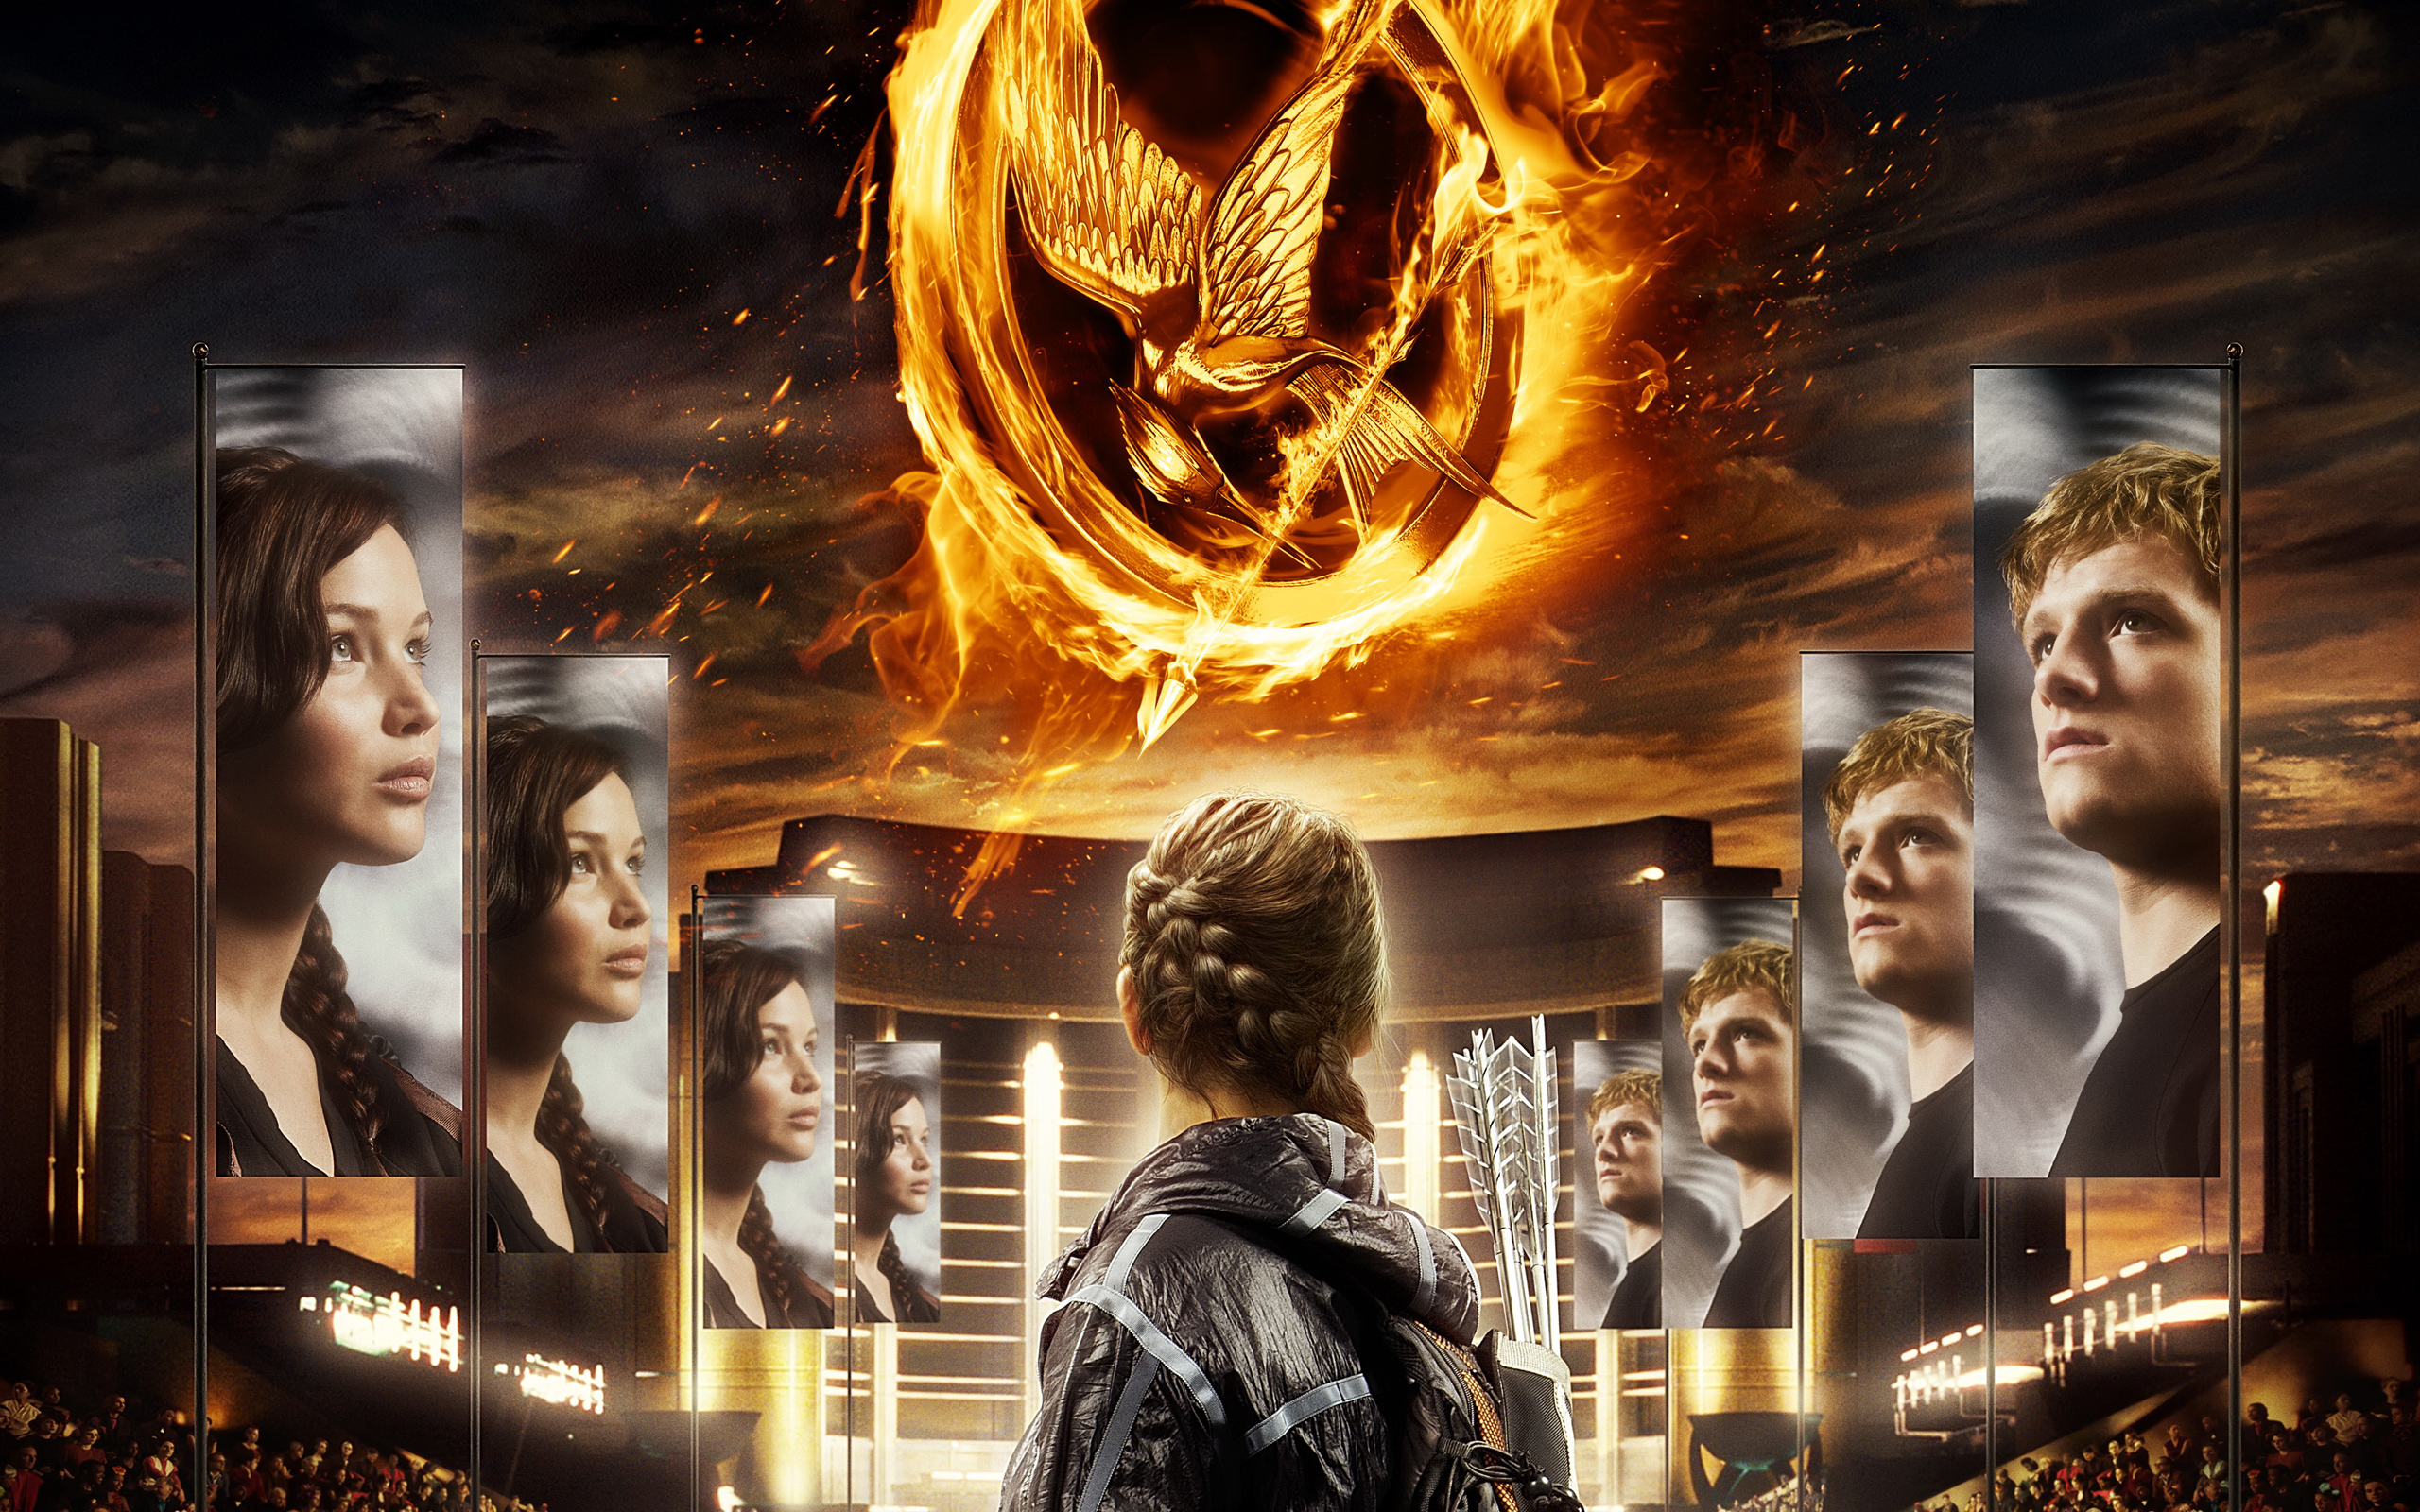 The Hunger Games 2012 Wallpapers HD Wallpapers